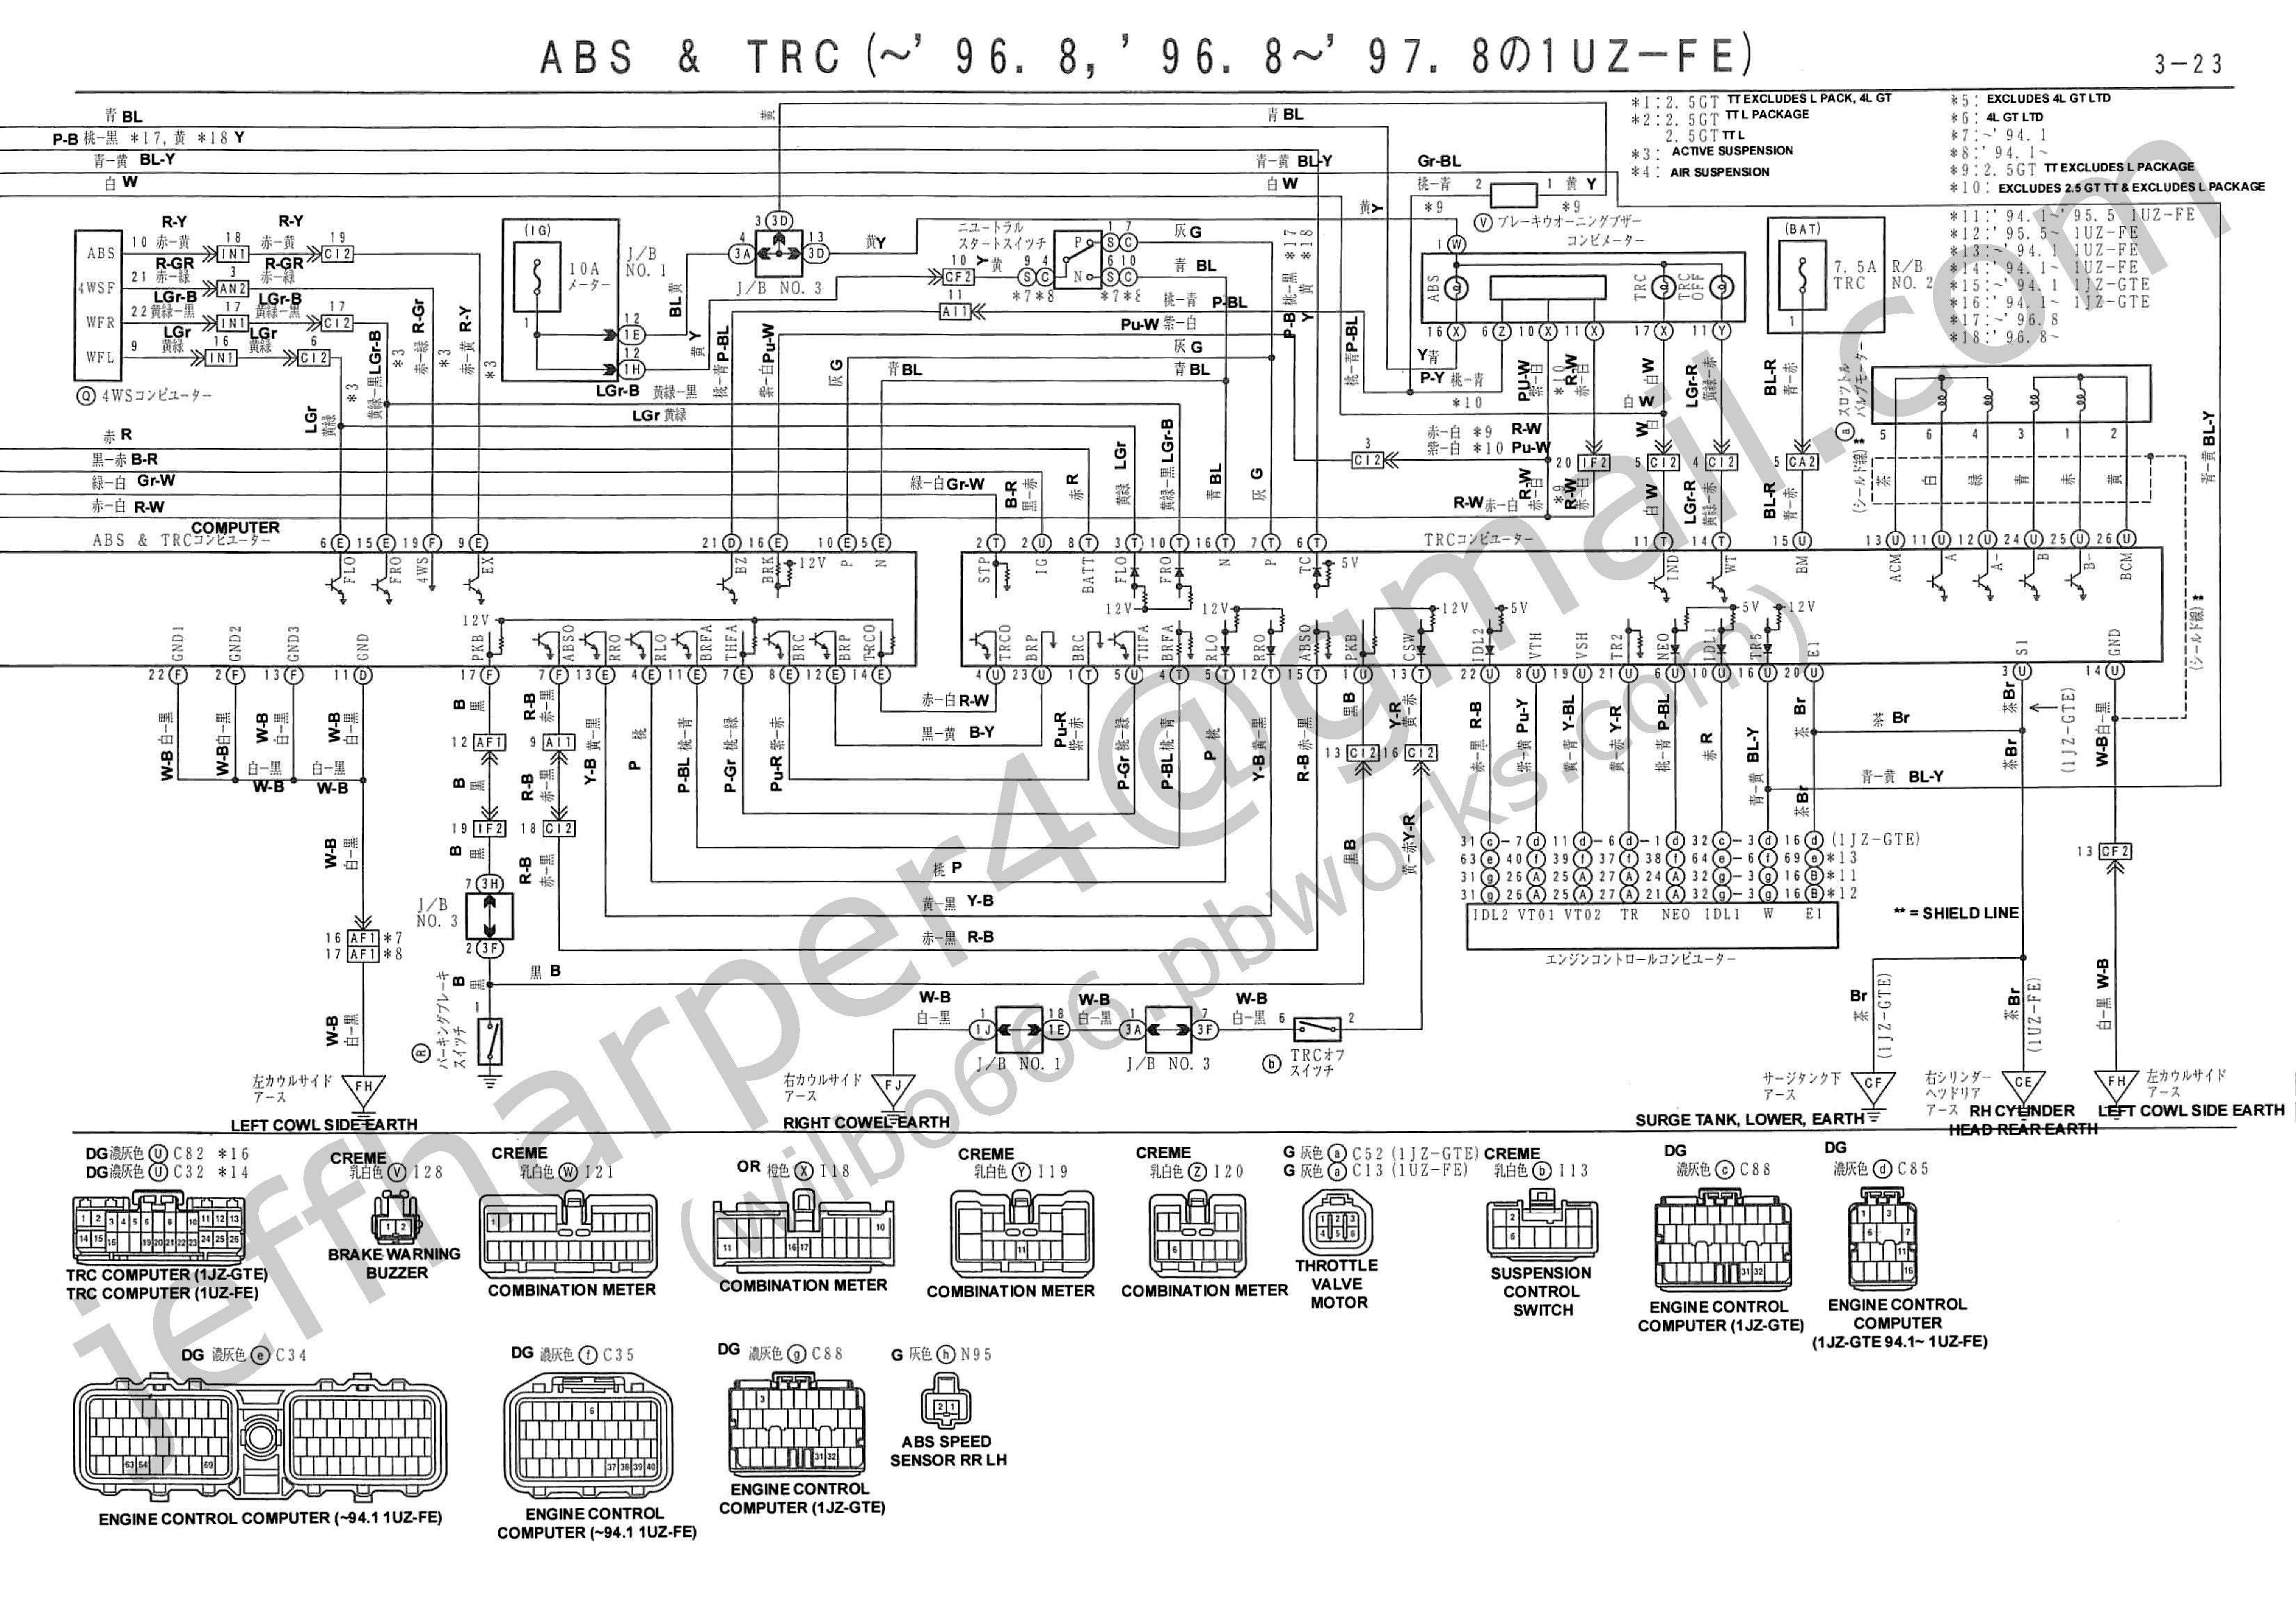 Wiring Diagram for An Electric Fuel Pump and Relay 1jz Series Ecu Wiring Harness Wiring Info • Of Wiring Diagram for An Electric Fuel Pump and Relay